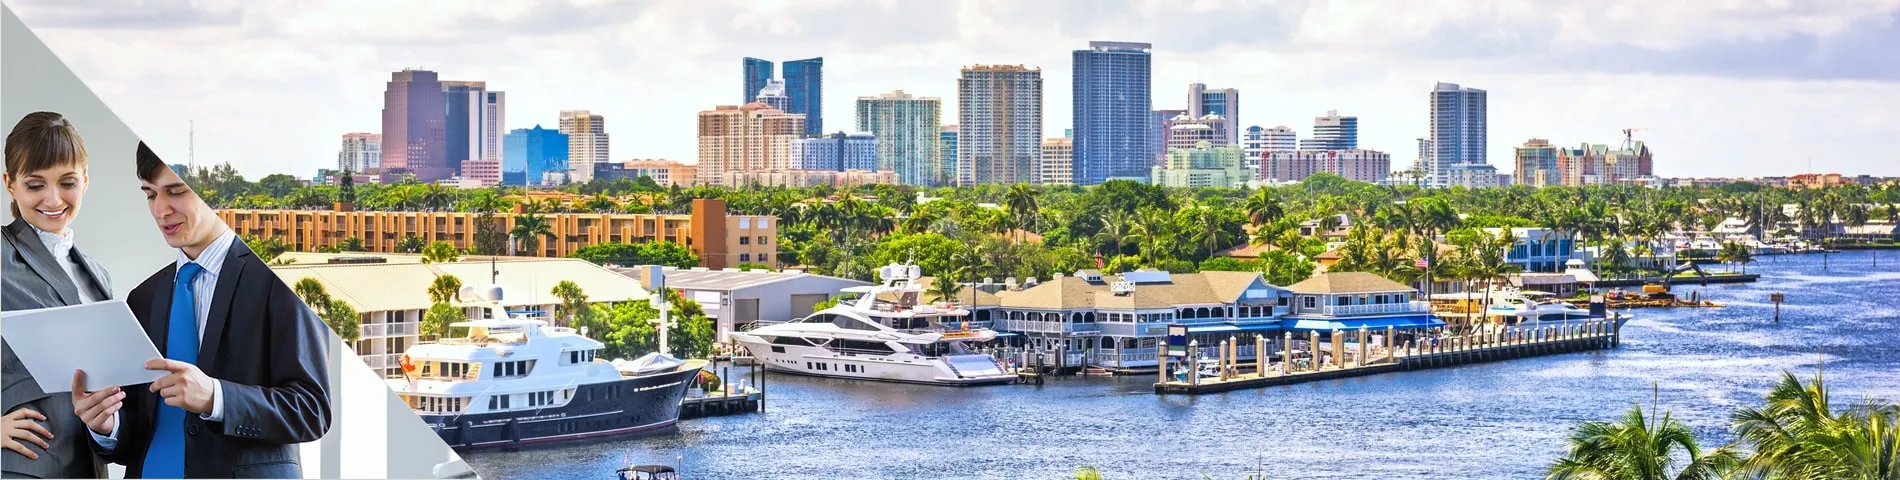 Fort Lauderdale - Business Privat